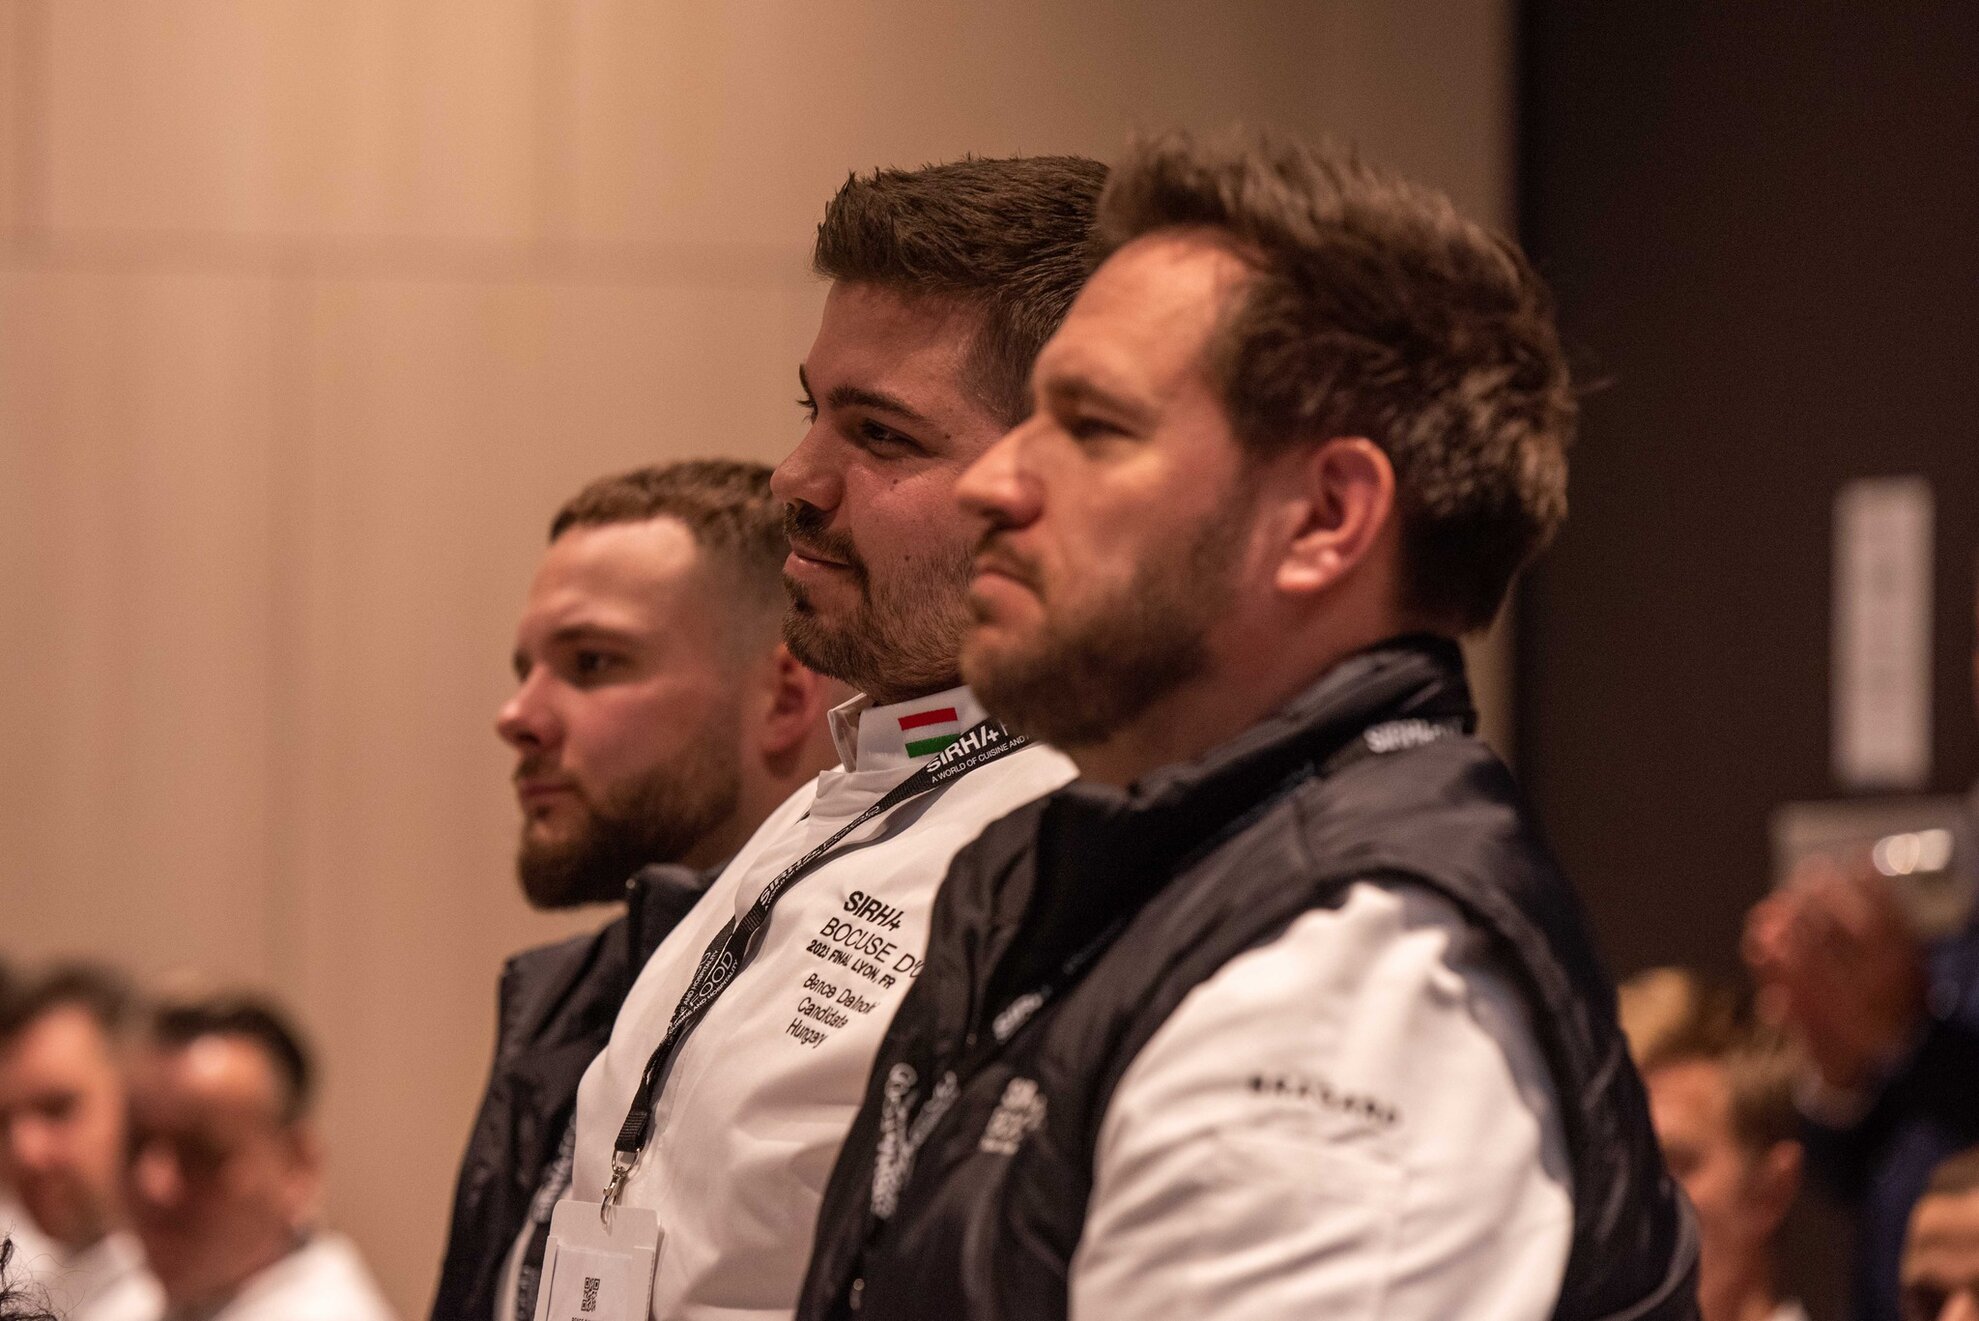 Hungarian Team Takes Bronze at Bocuse d'Or Final